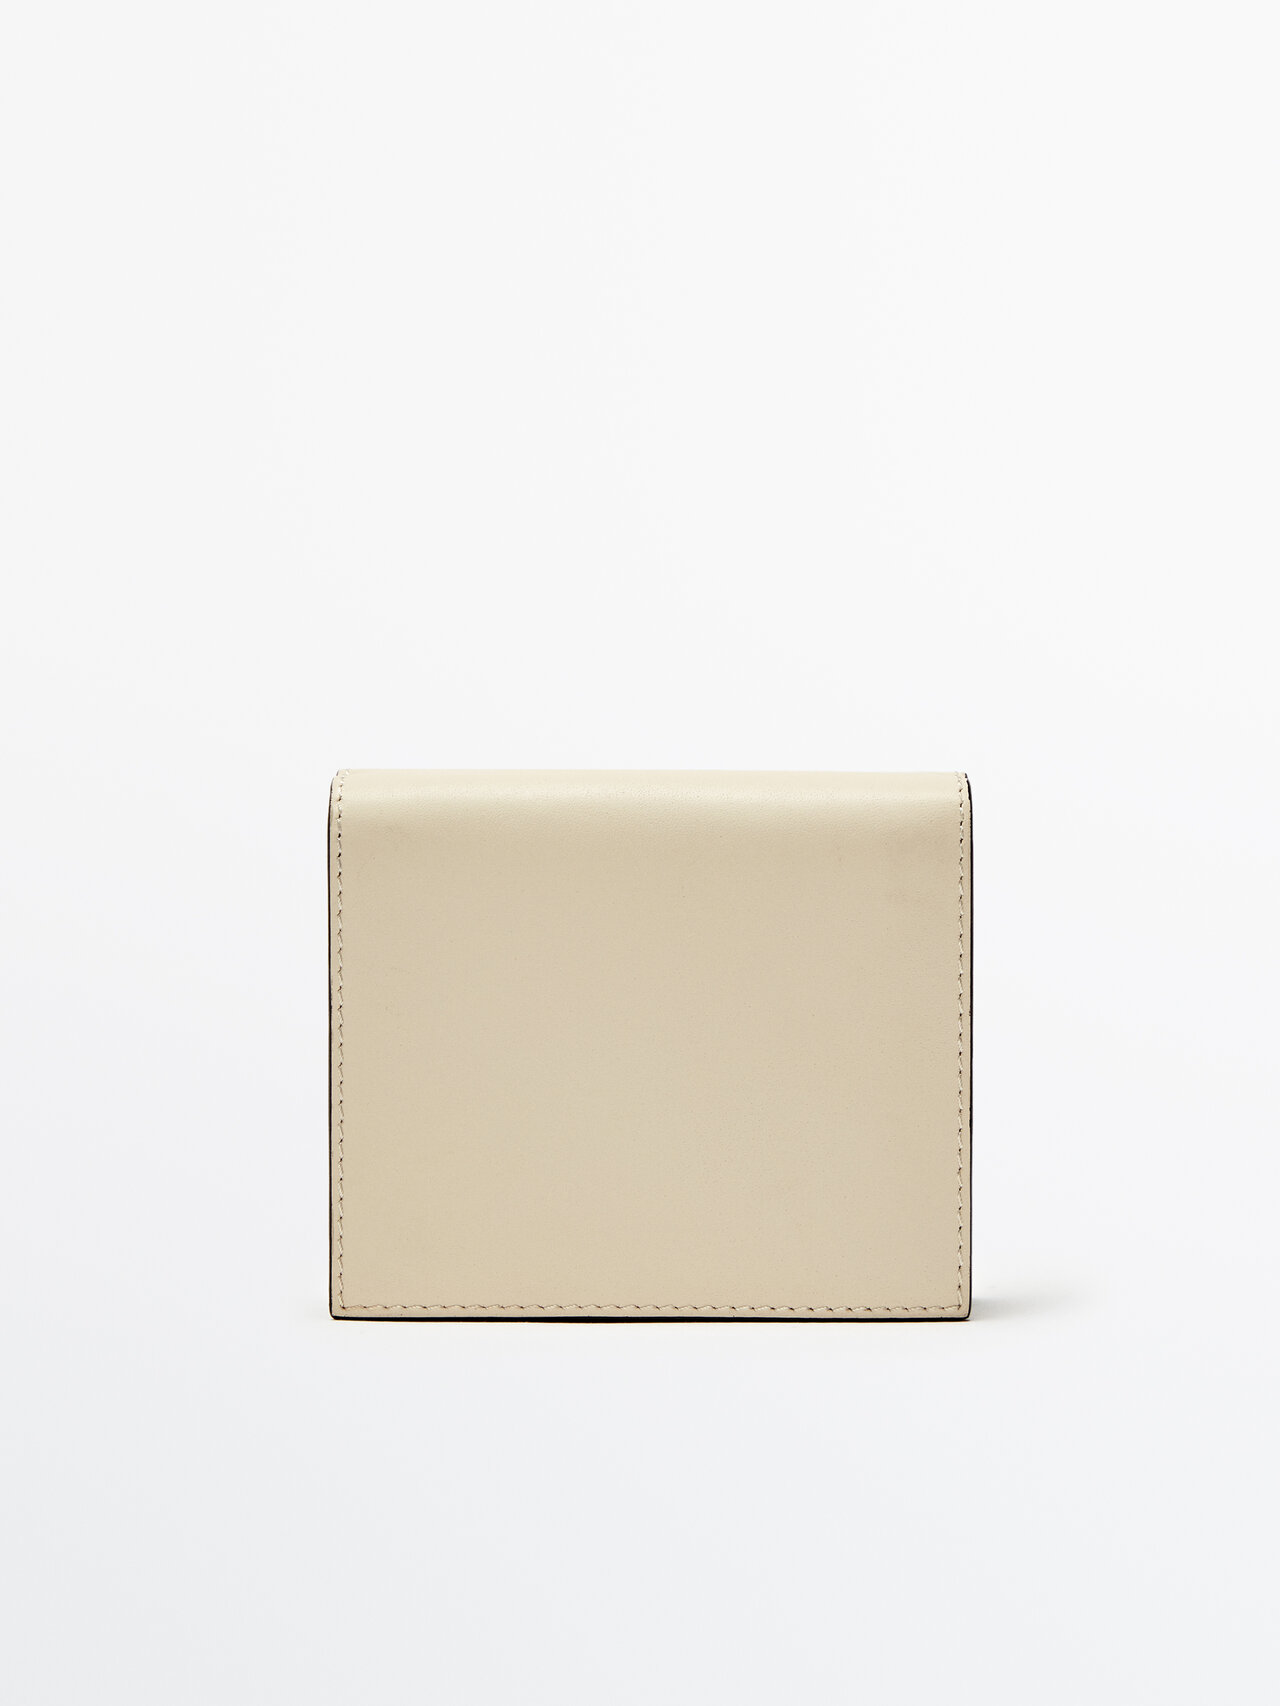 Massimo Dutti Nappa Leather Wallet In Neutrals